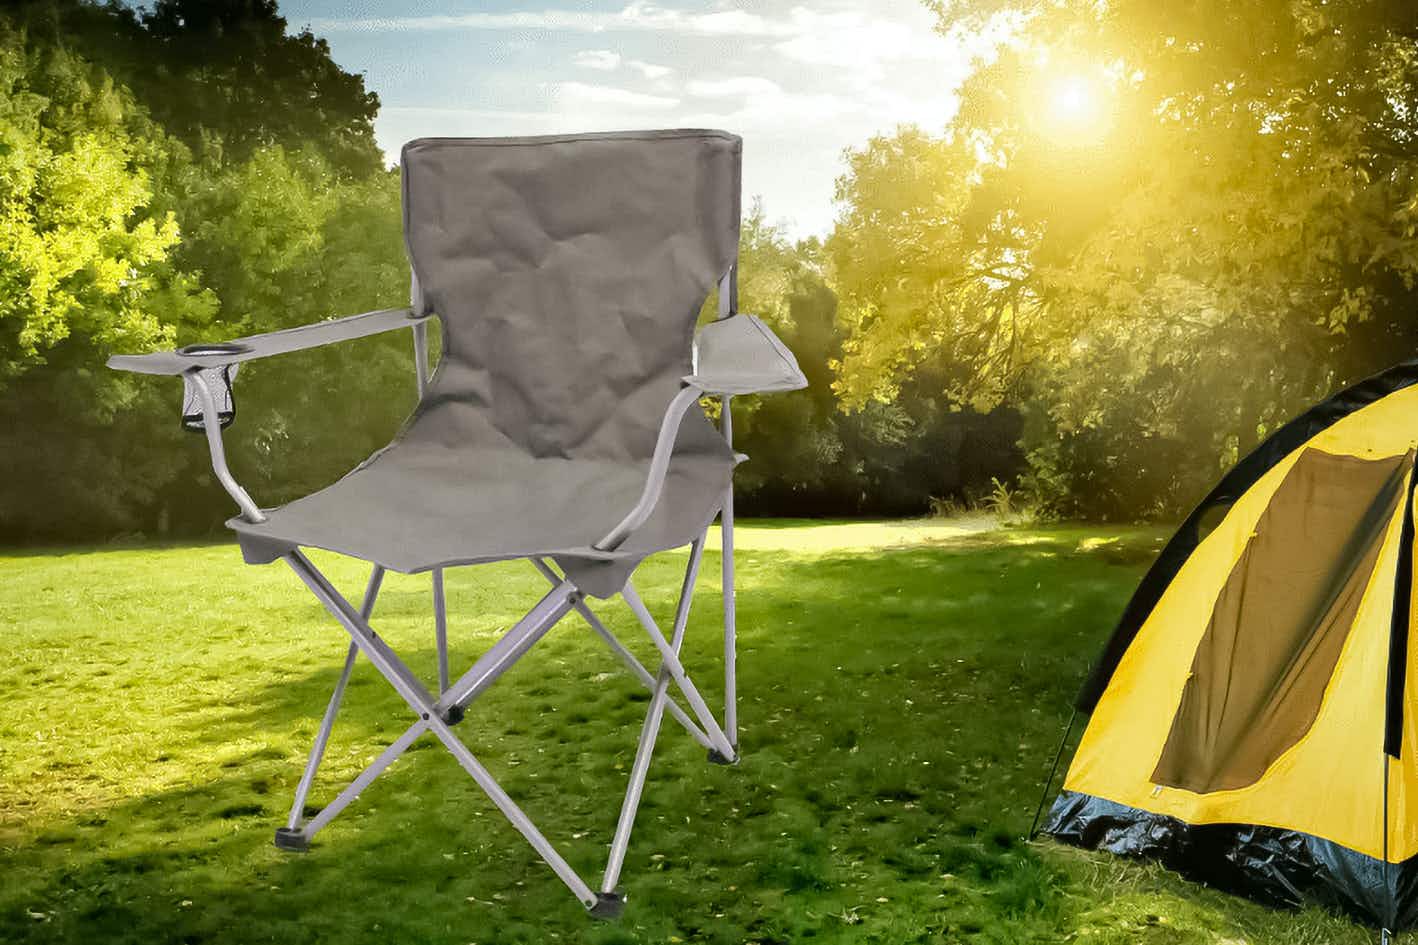 Grab a Set of 4 Camping Chairs for Just $28 at Walmart (Reg. $45)